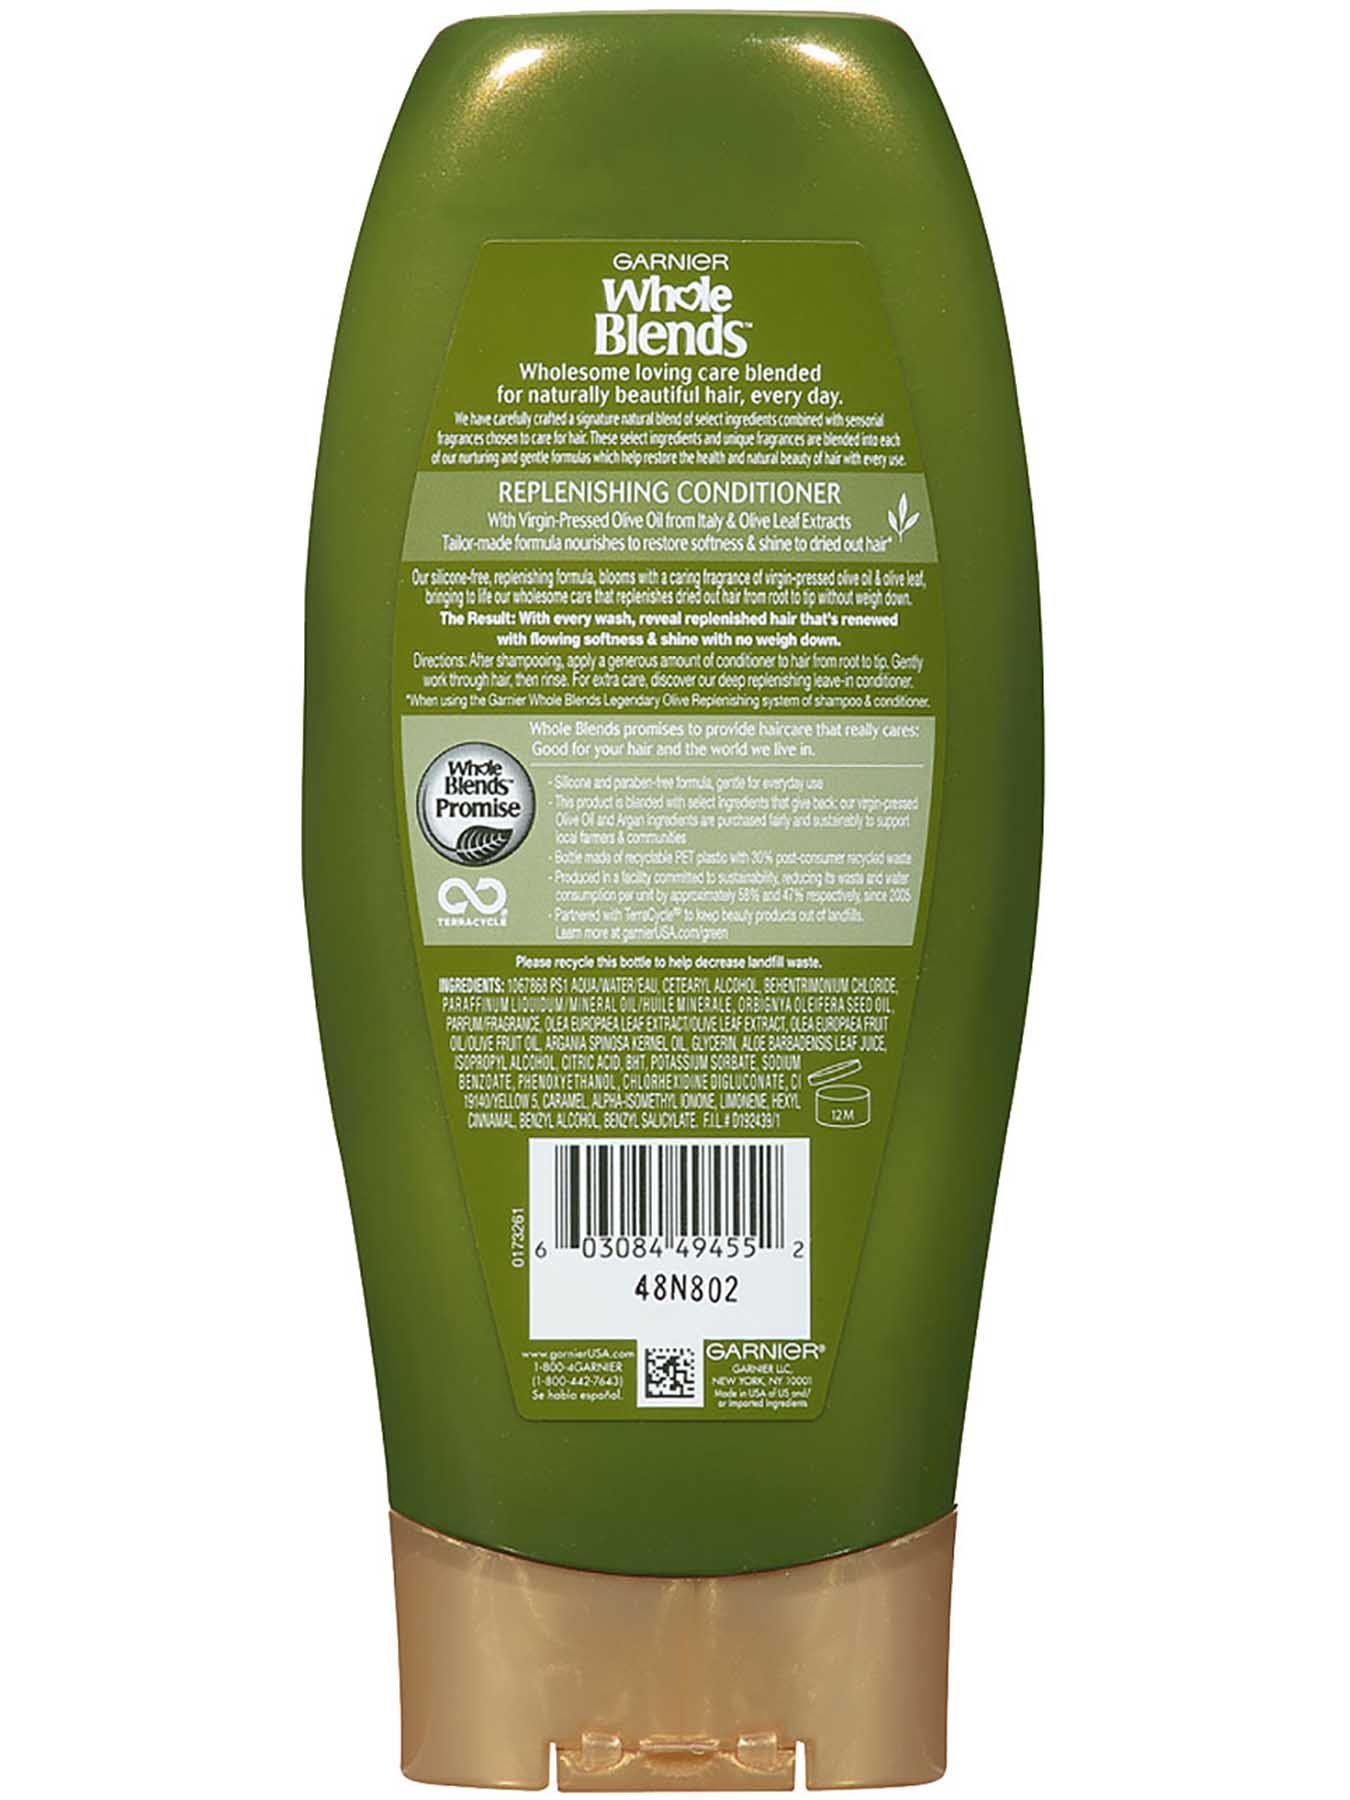 Back view of Replenishing Conditioner with Legendary Virgin-Pressed Olive Oil and Olive Leaf Extracts.